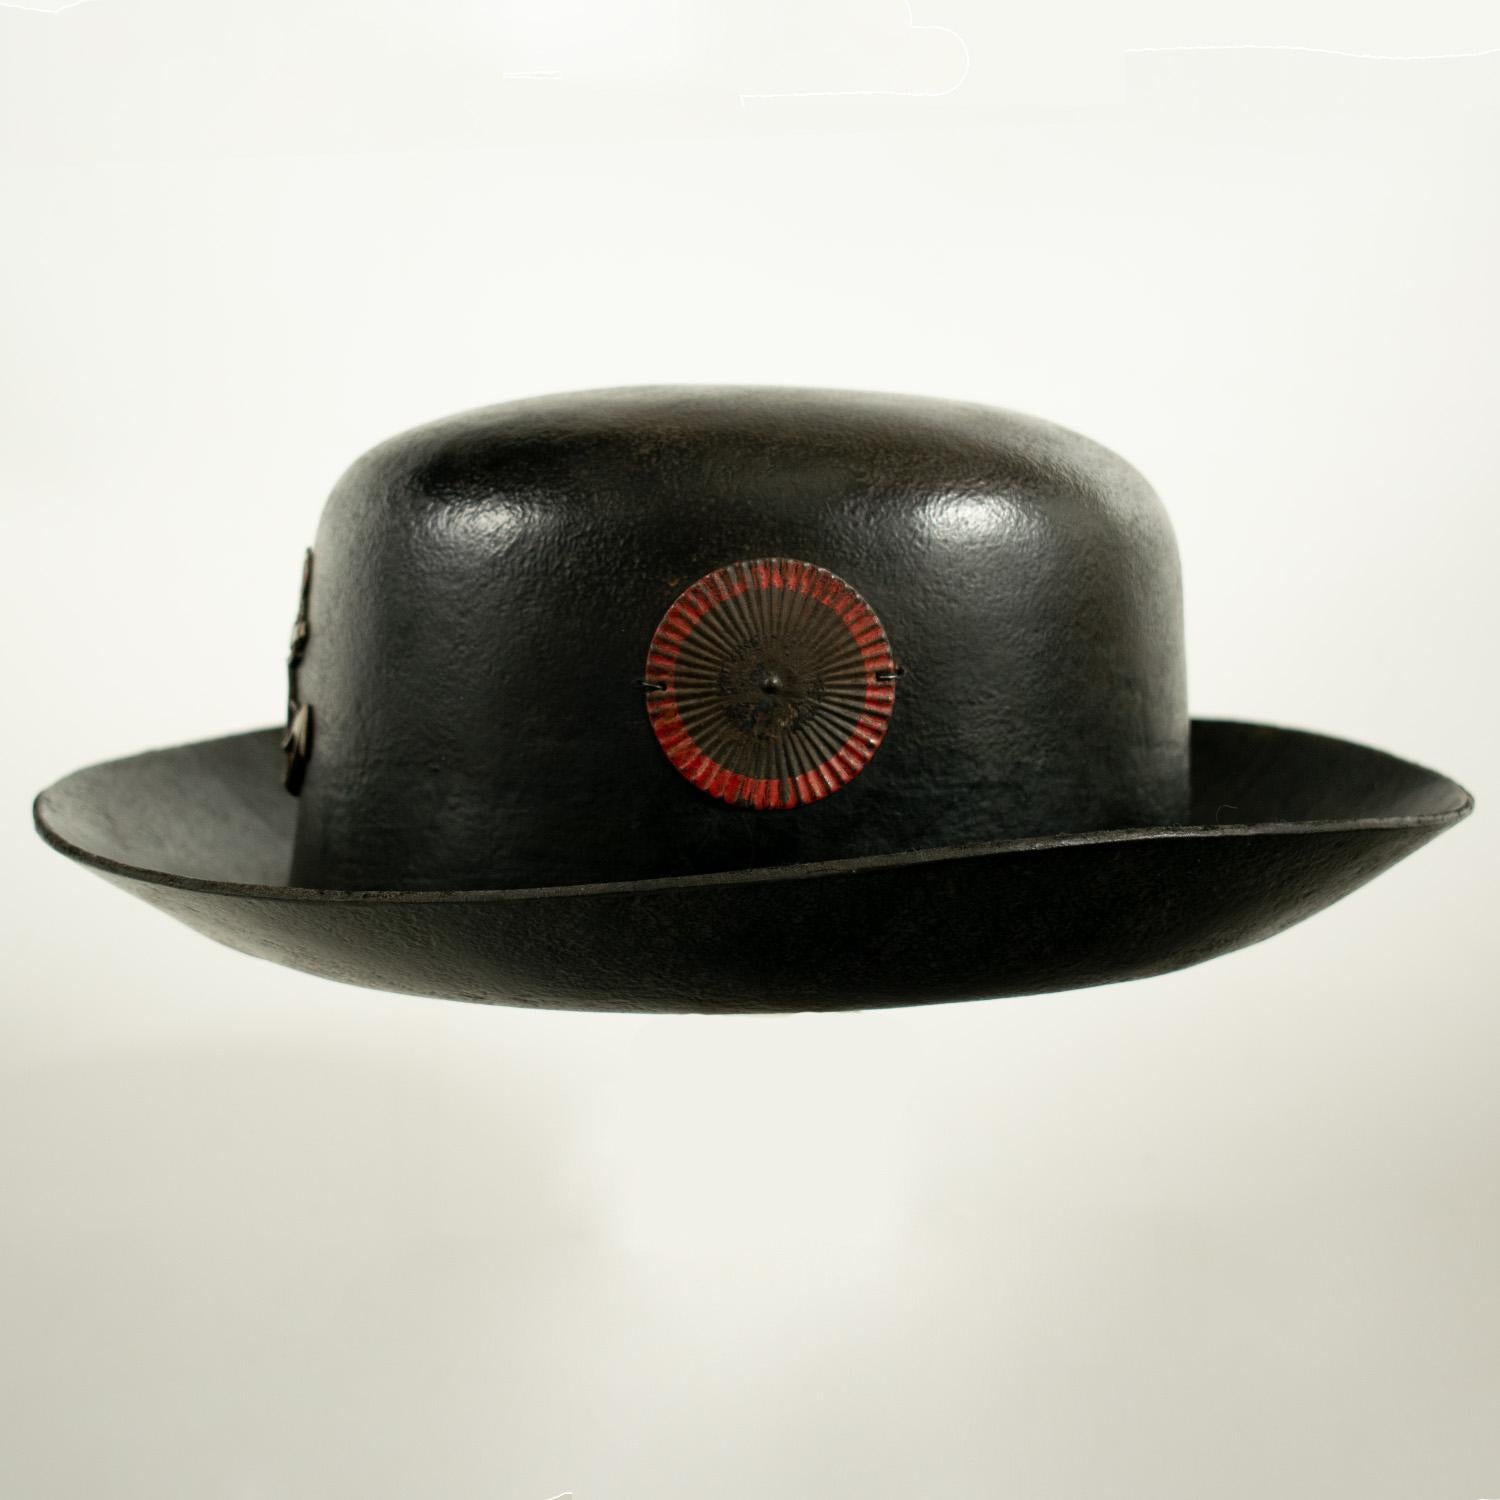 RARE FRENCH SEAMAN'S TAR HAT - early 19th century. For Sale 3